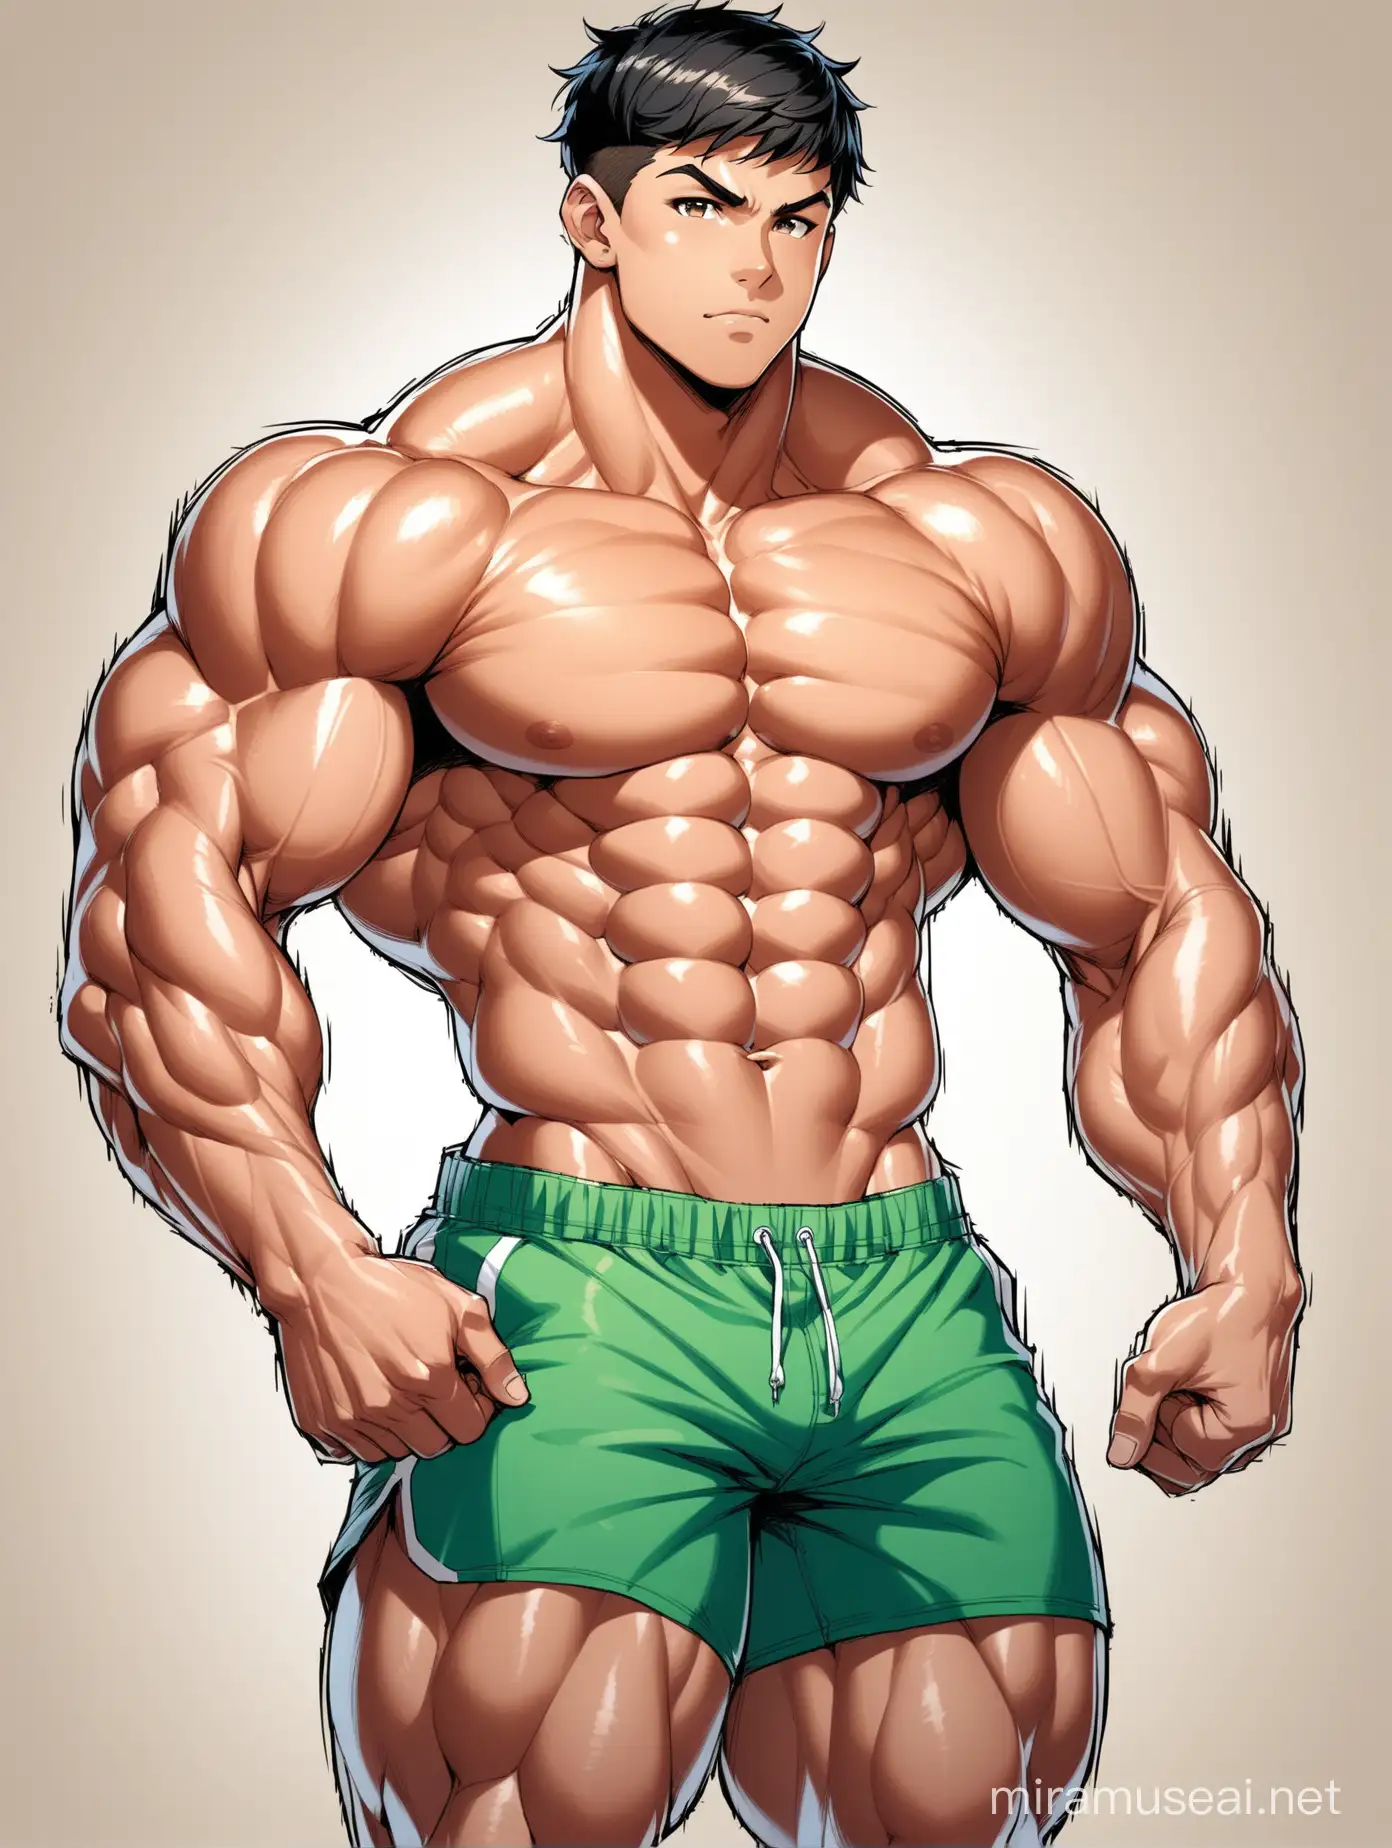 Muscular Teenage Male with Strong Physique and Delicate Features in Athletic Attire